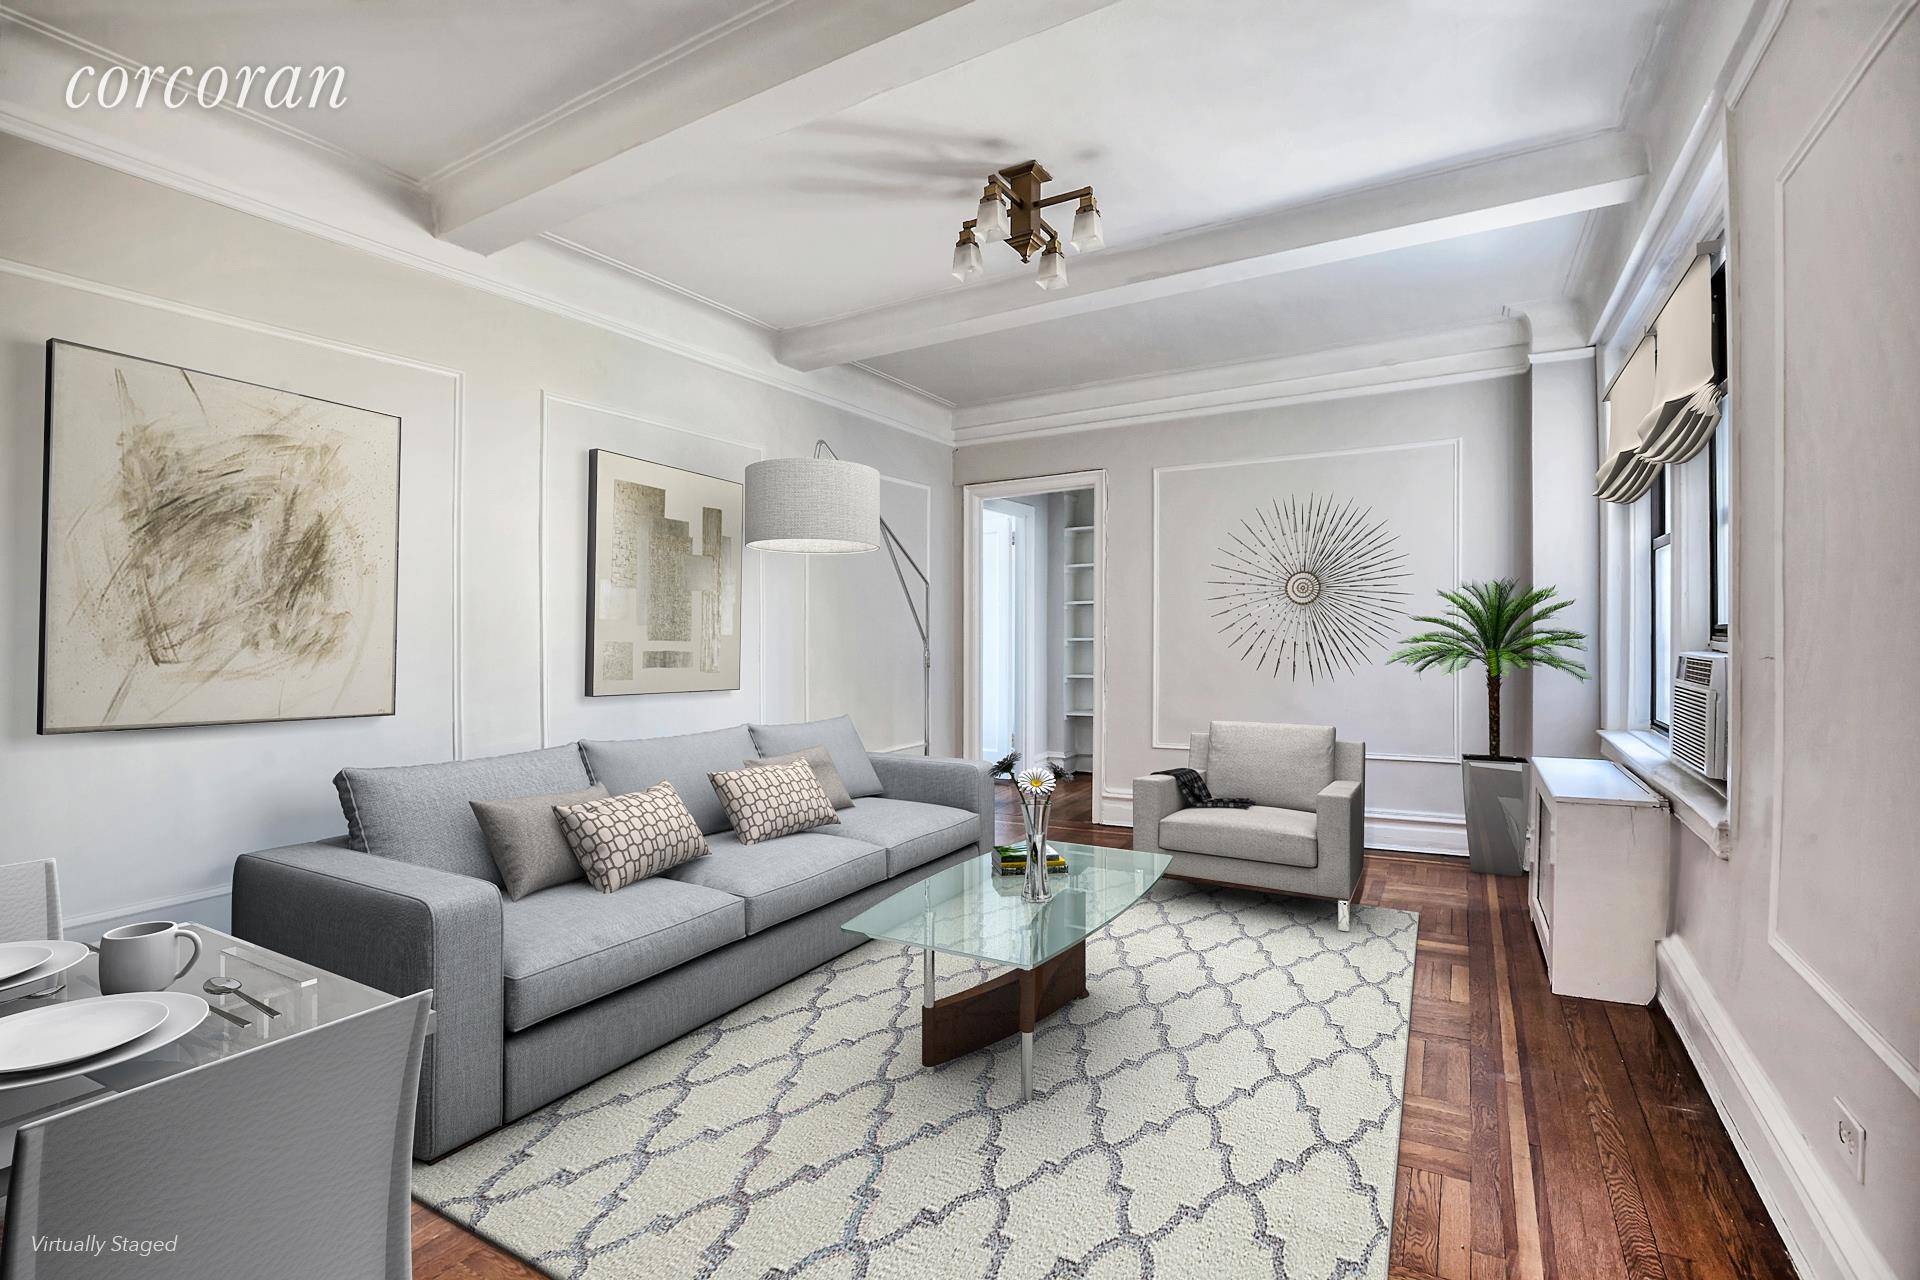 Its been said living on this beautiful tree lined street, in this charming quintessential pre war building with Central Park as a backyardhalf a block away is the perfect NYC ...